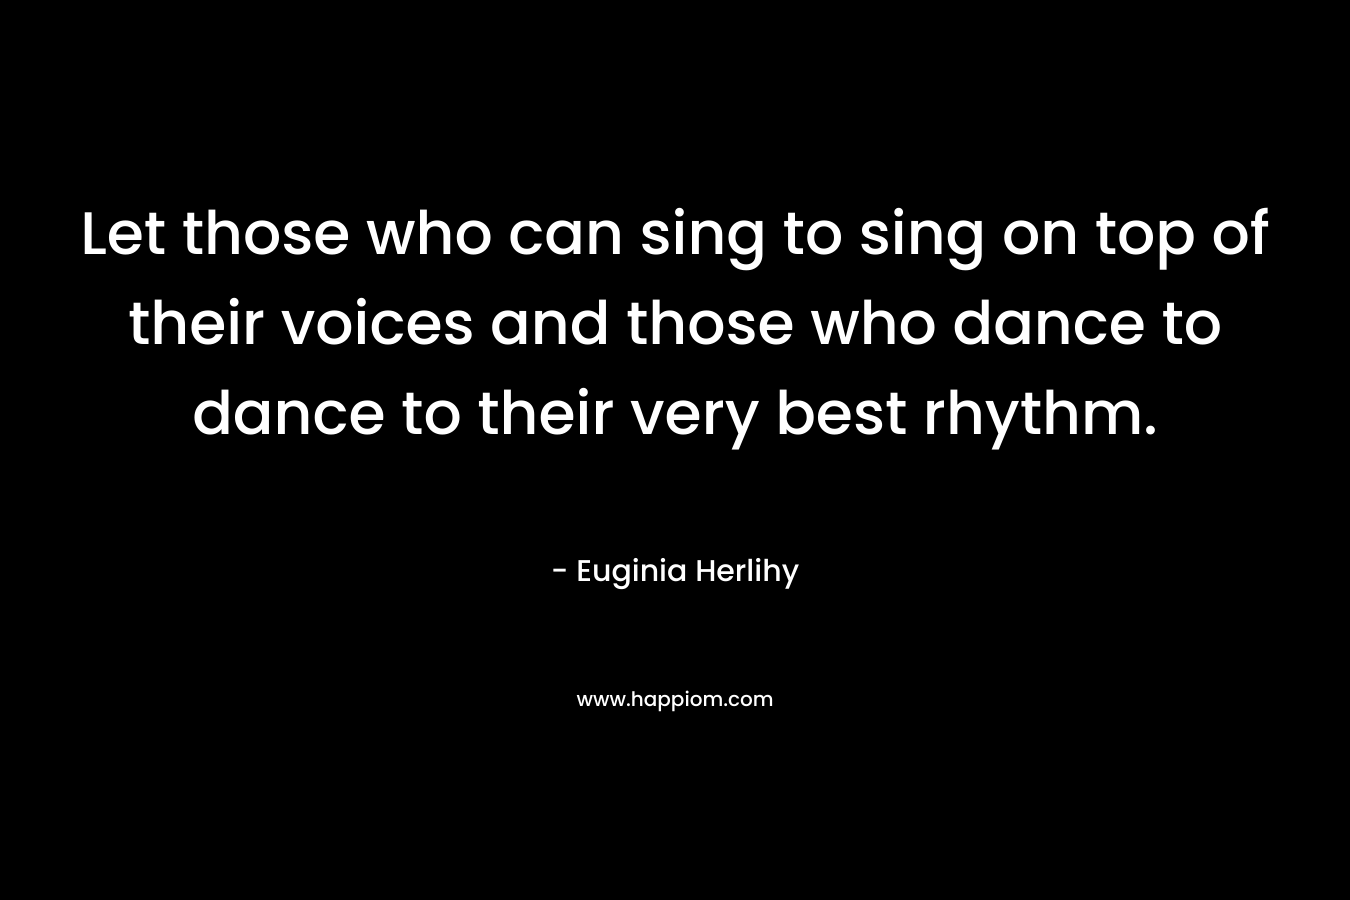 Let those who can sing to sing on top of their voices and those who dance to dance to their very best rhythm. – Euginia Herlihy